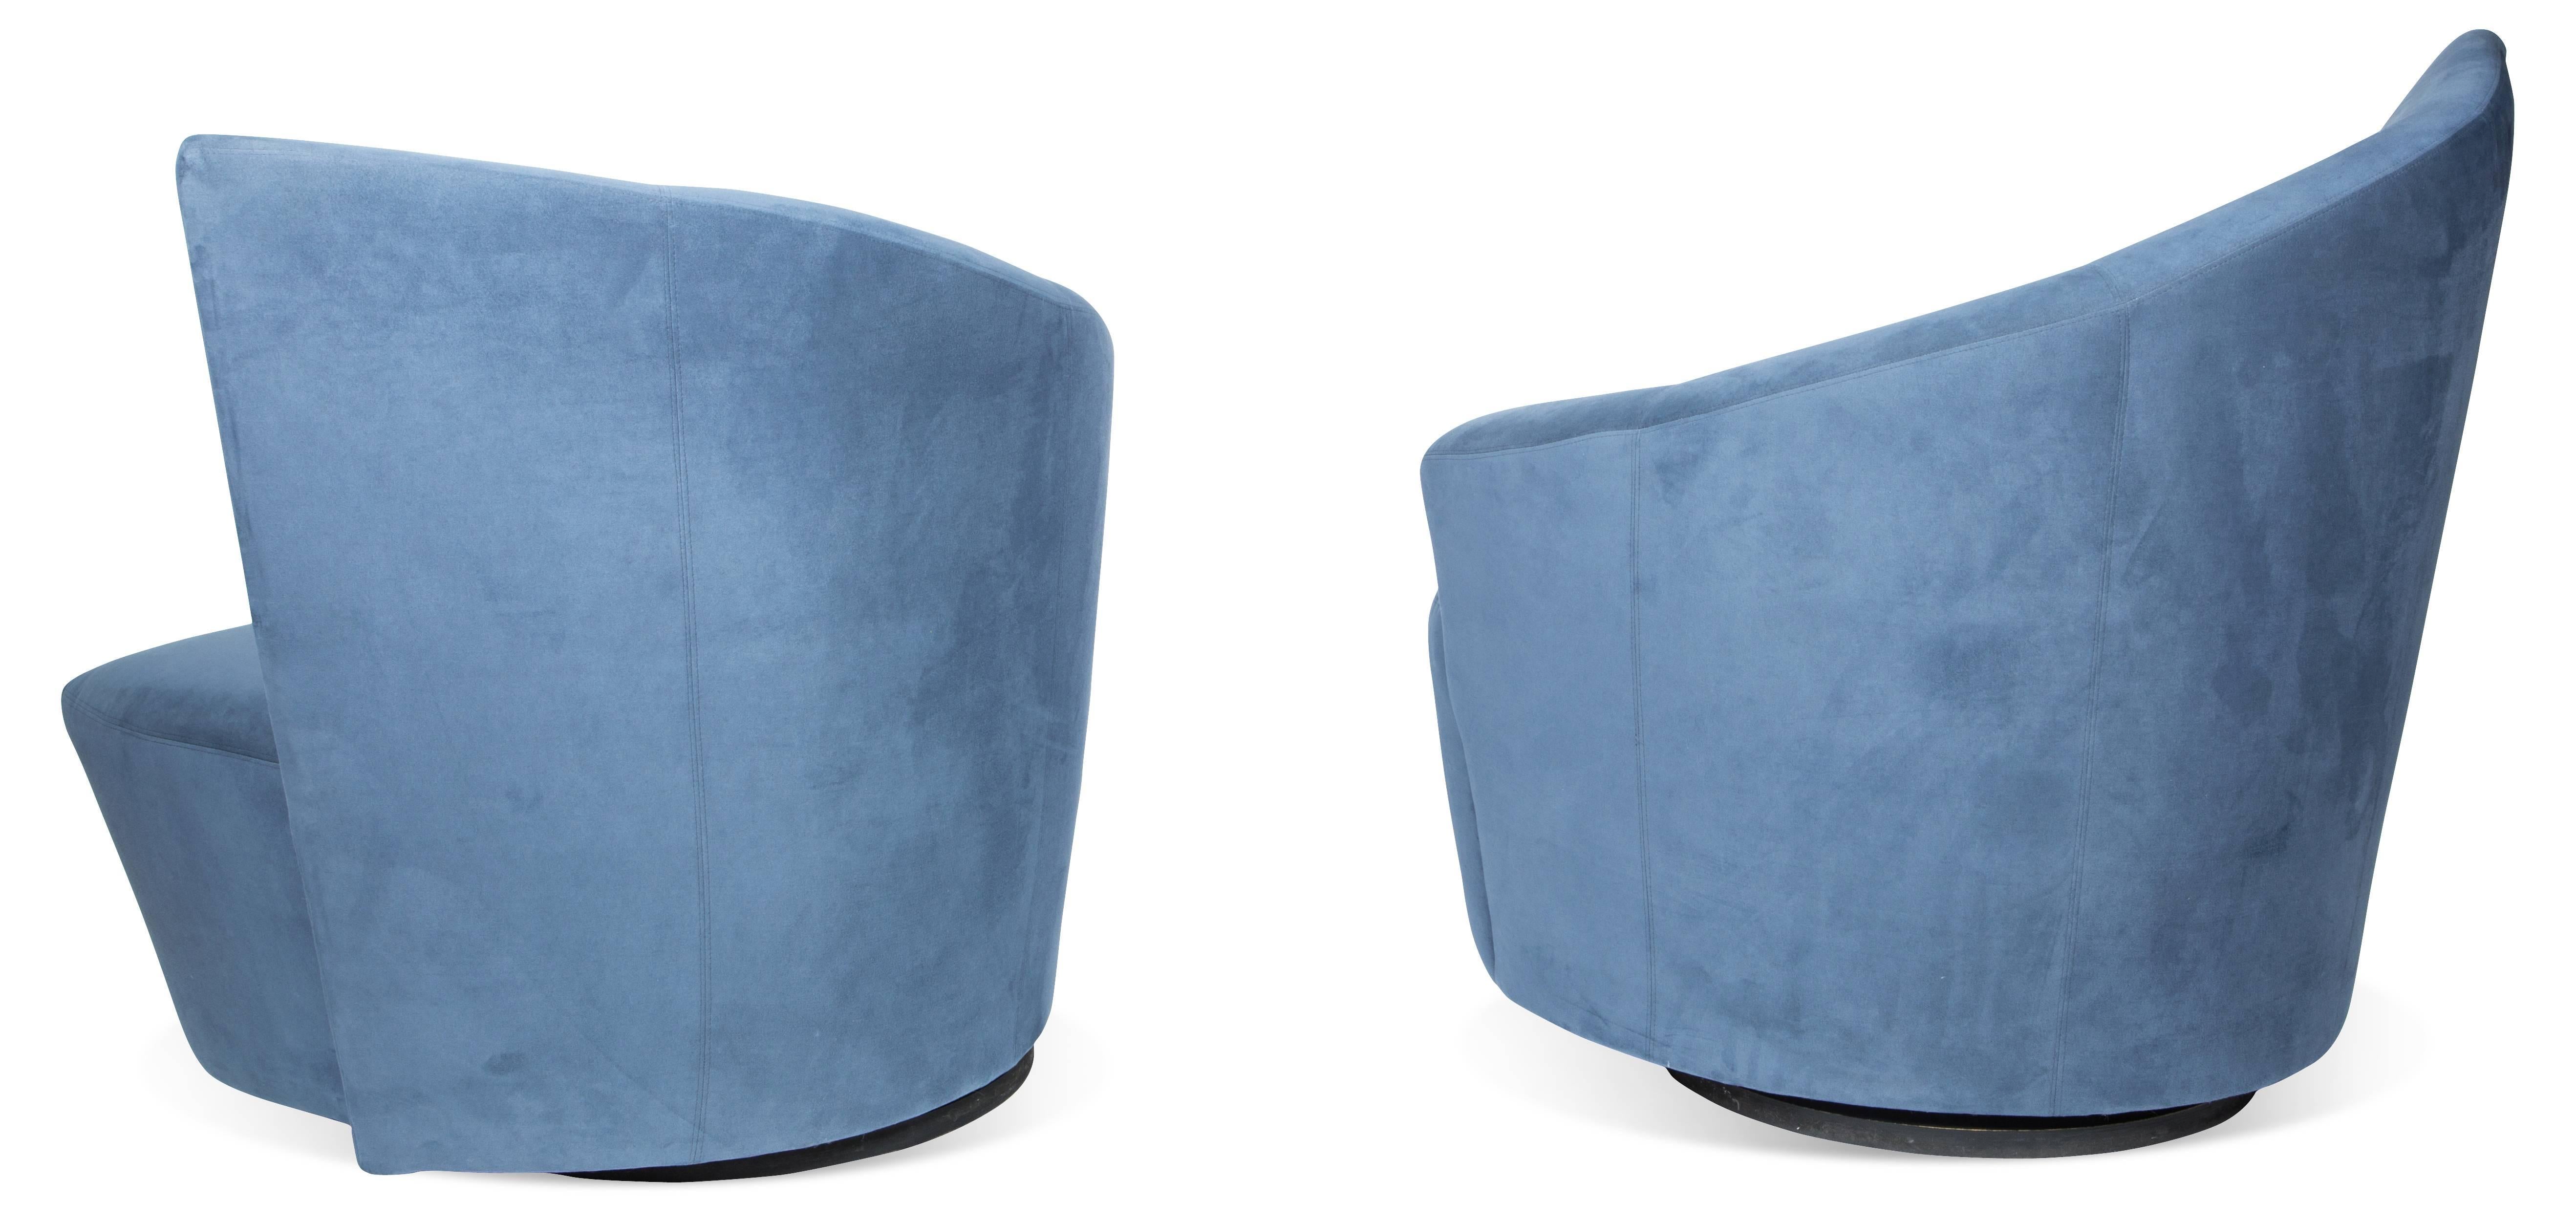 Pair of sculptural Bilbao swivel lounge chairs designed by Vladimir Kagan for Weiman preview features comfortable plush seats and curved angular backrests/armrests. The Bilbao collection was inspired by Frank Gehry's Guggenheim Museum in Bilbao,